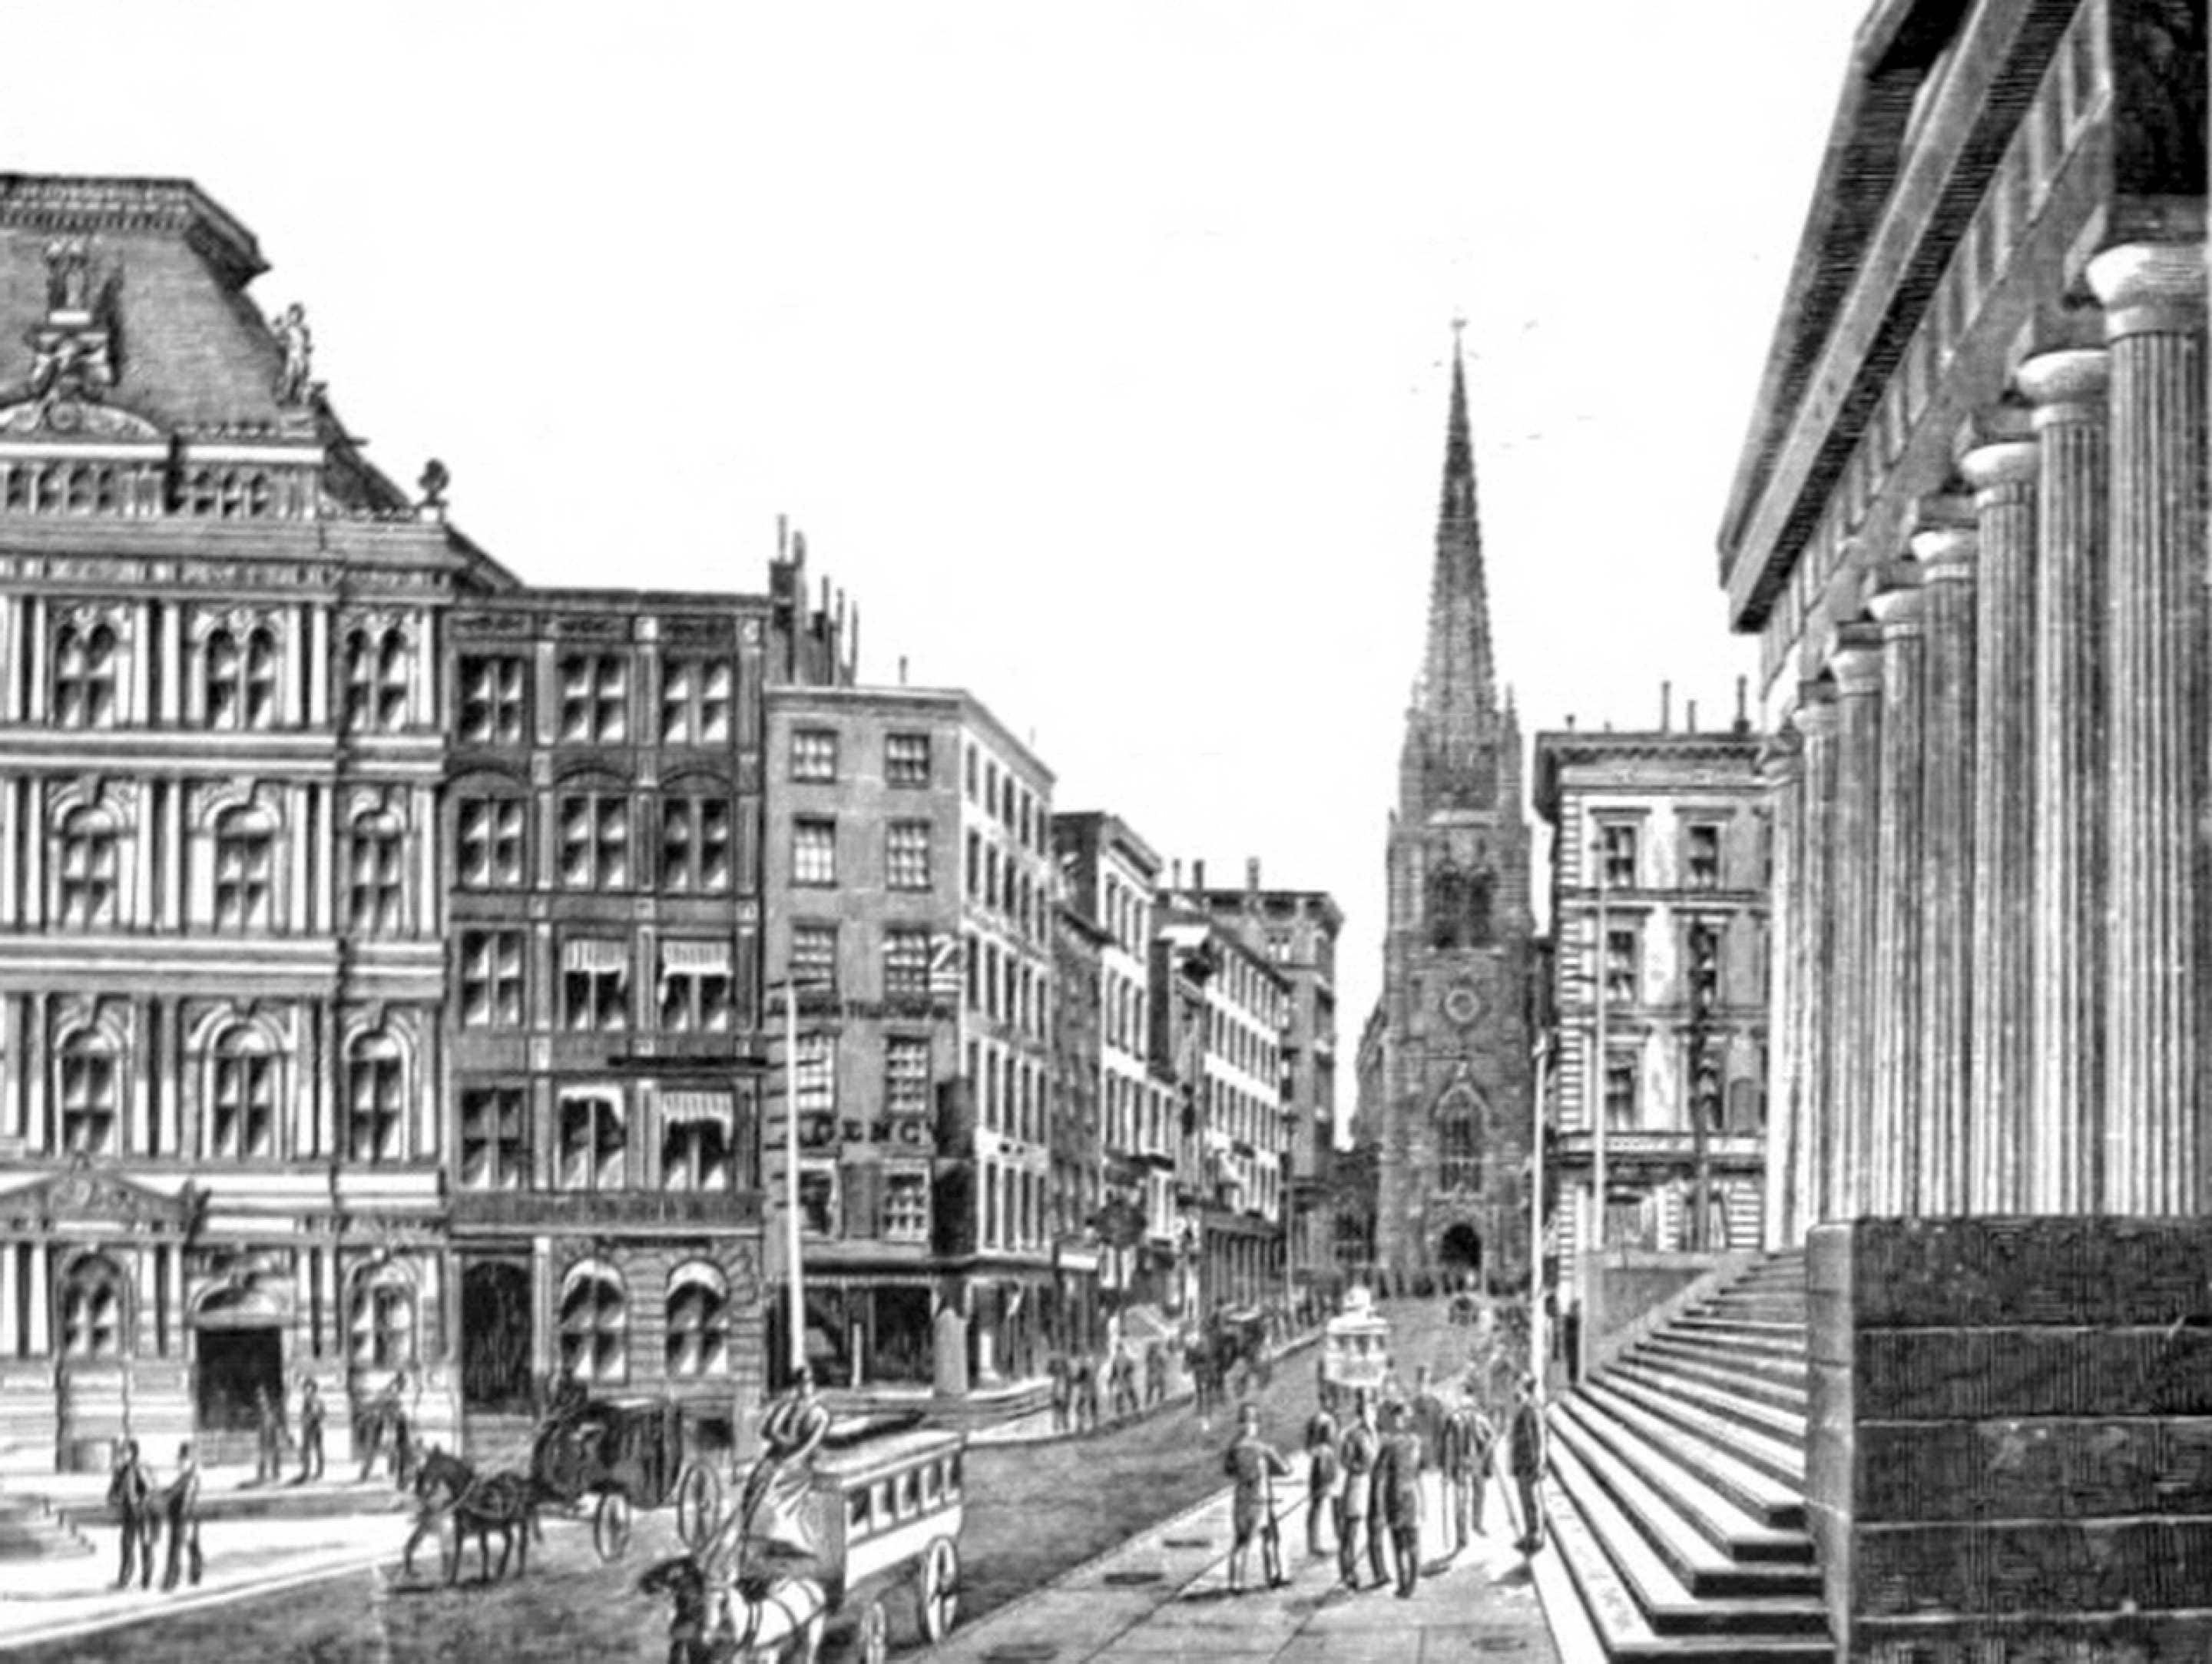 Wall Street in 1880s. Image: Wikimedia Commons.